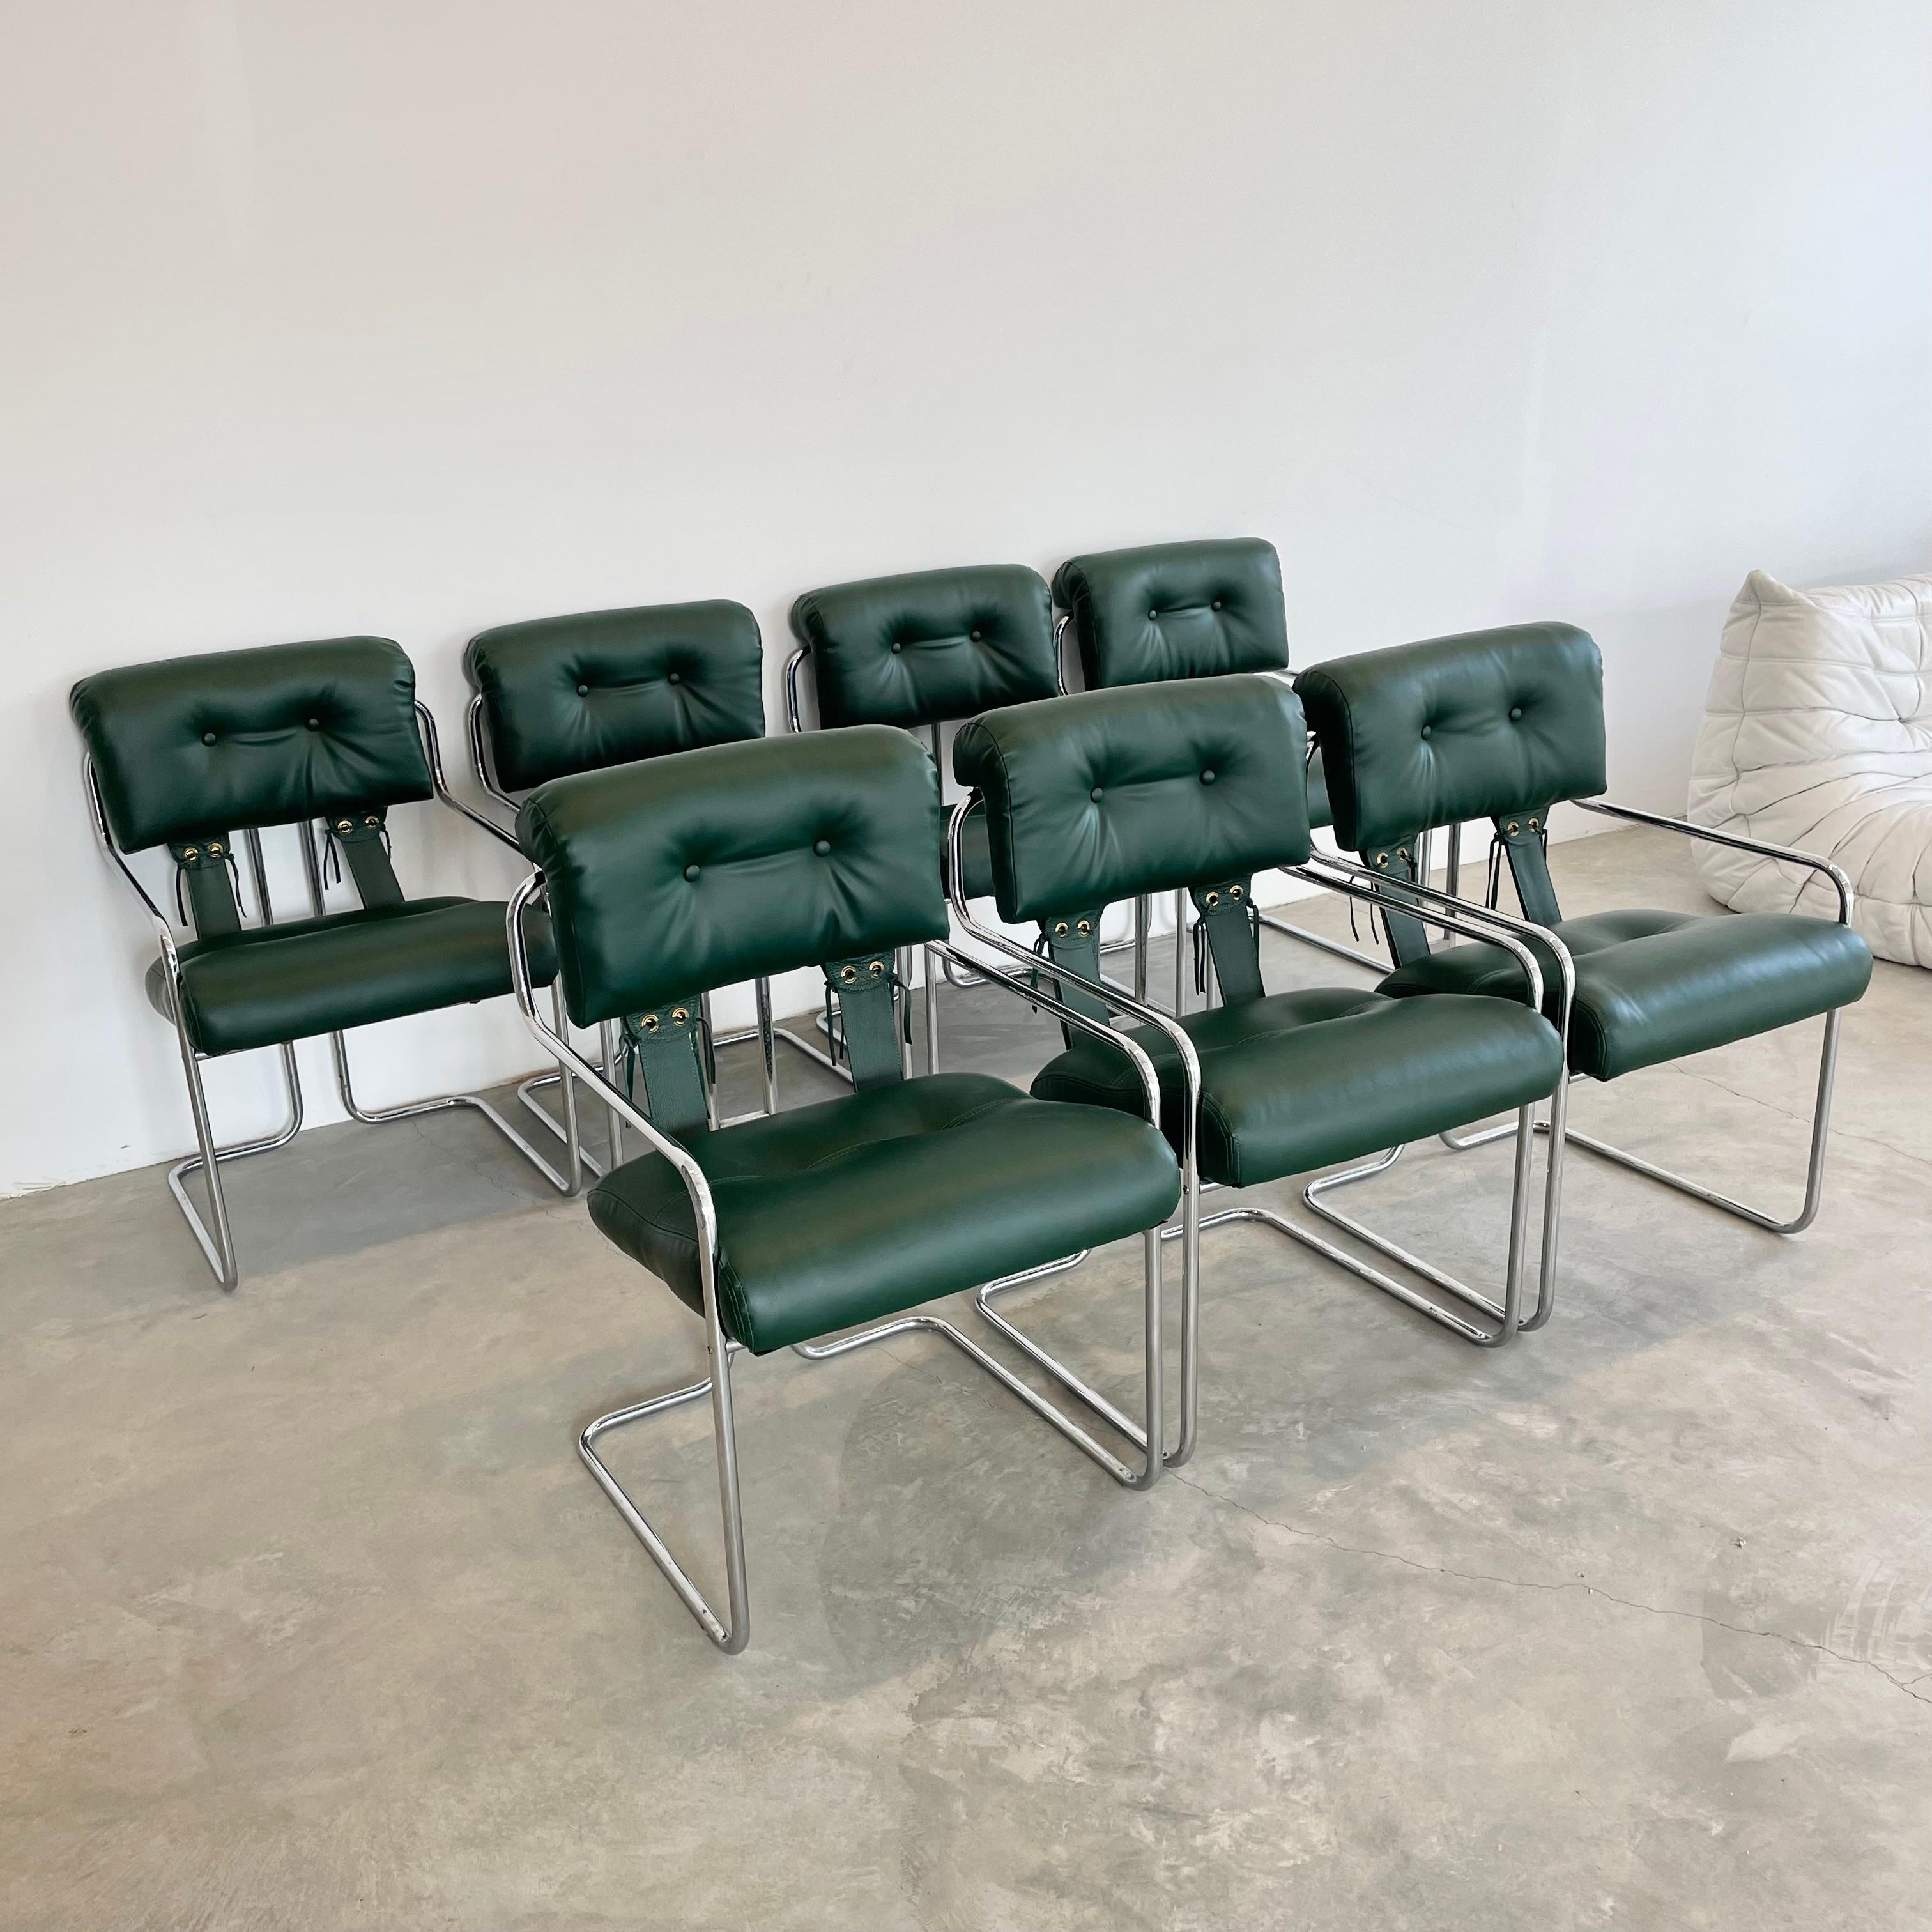 Set of 7 'Tucroma' Chairs in Green by Guido Faleschini, 1970s Italy 7